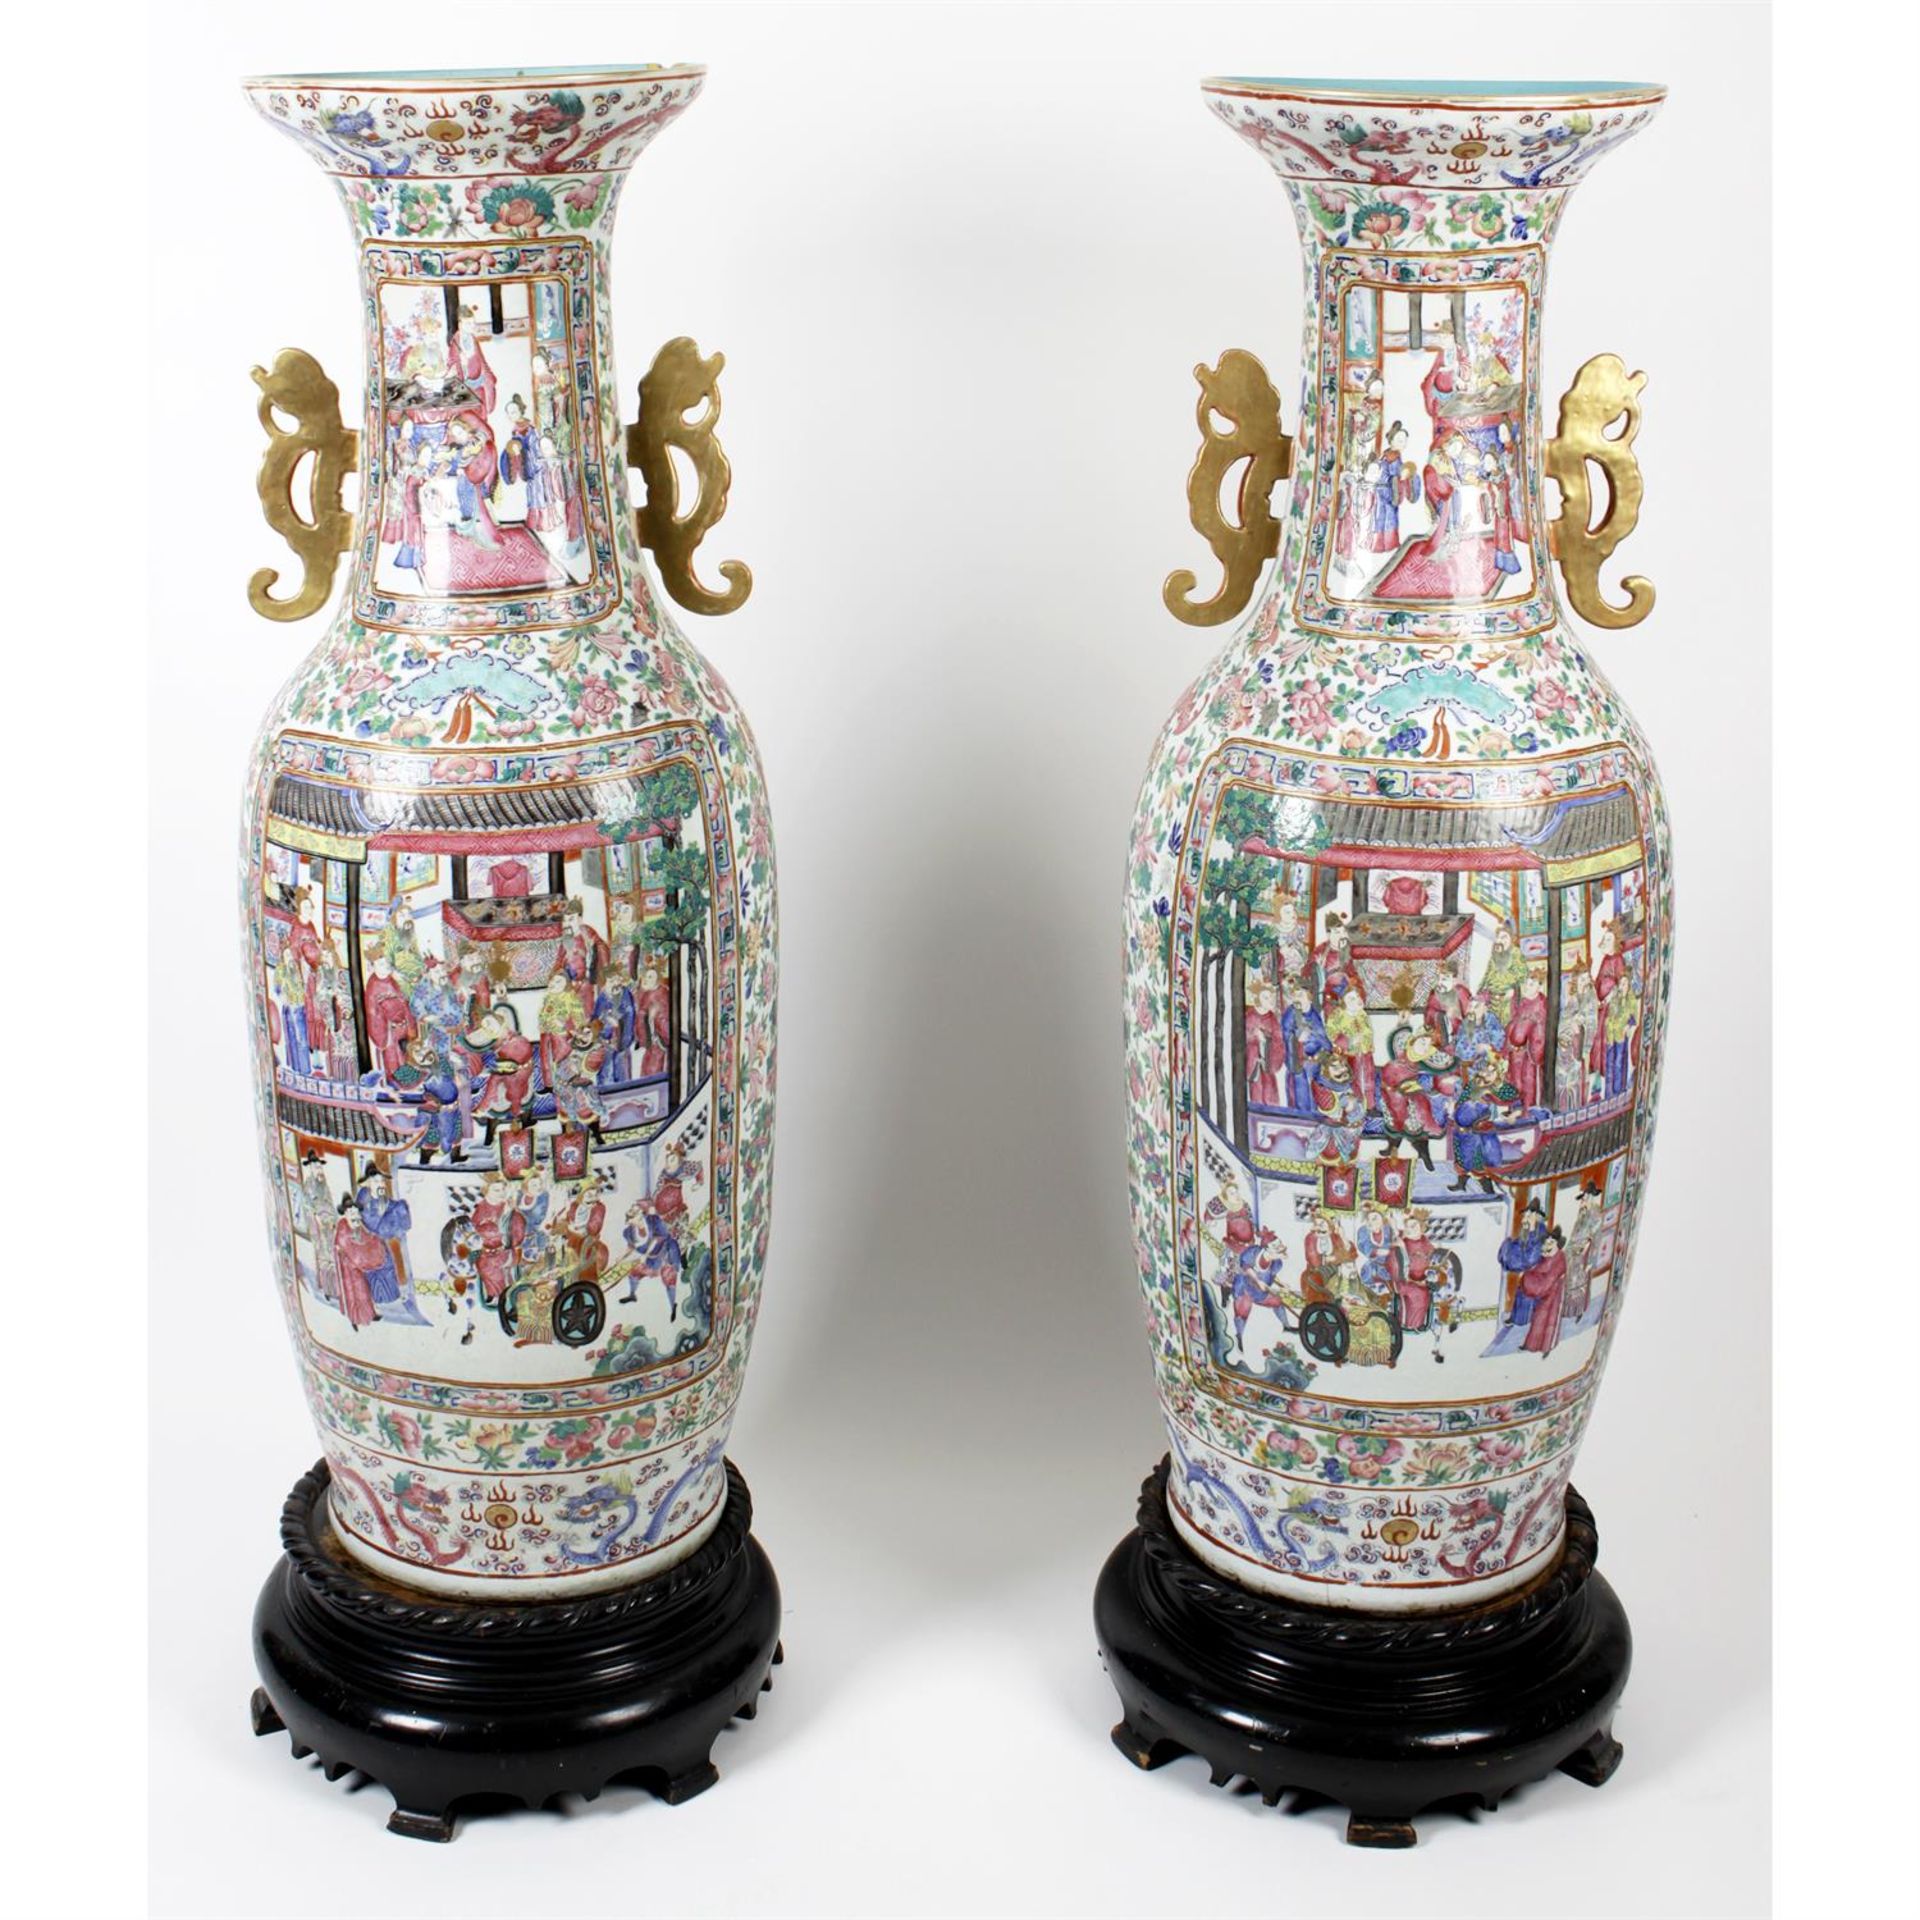 A pair of impressive, large mid-19th century Cantonese porcelain vases. - Image 4 of 20